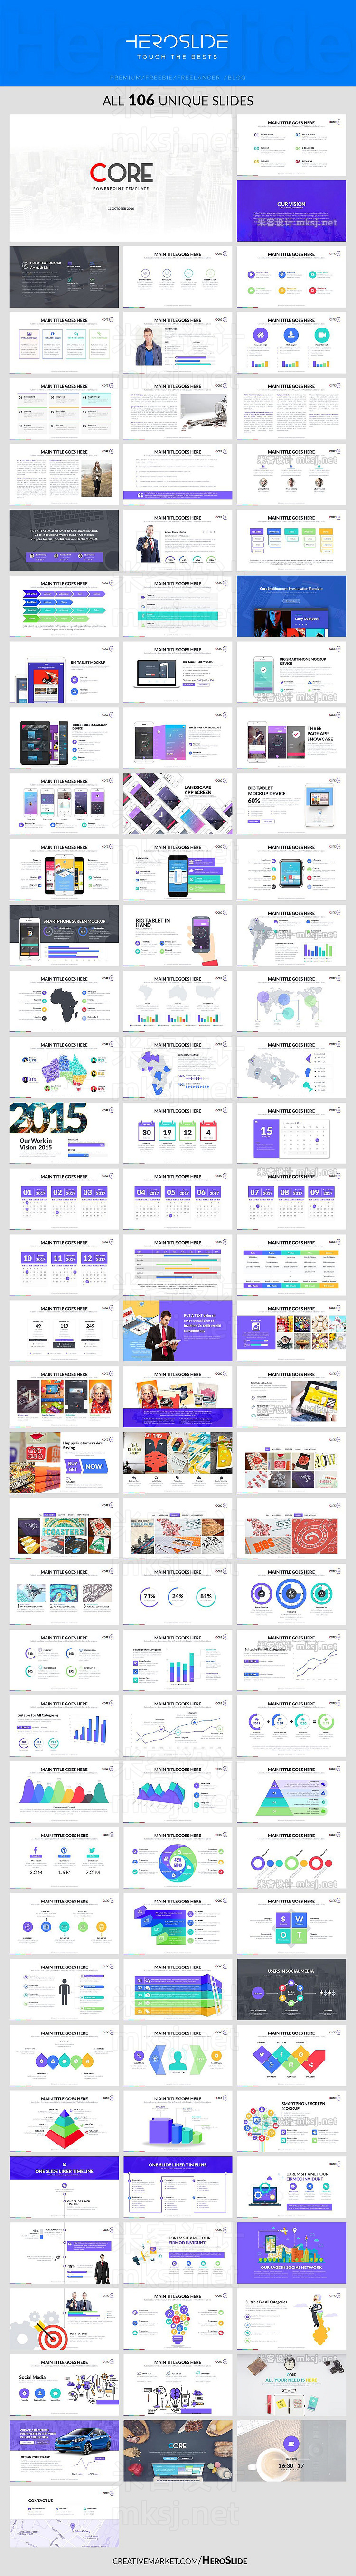 PPT模板 12 in 1 Business Powerpoint Bundle